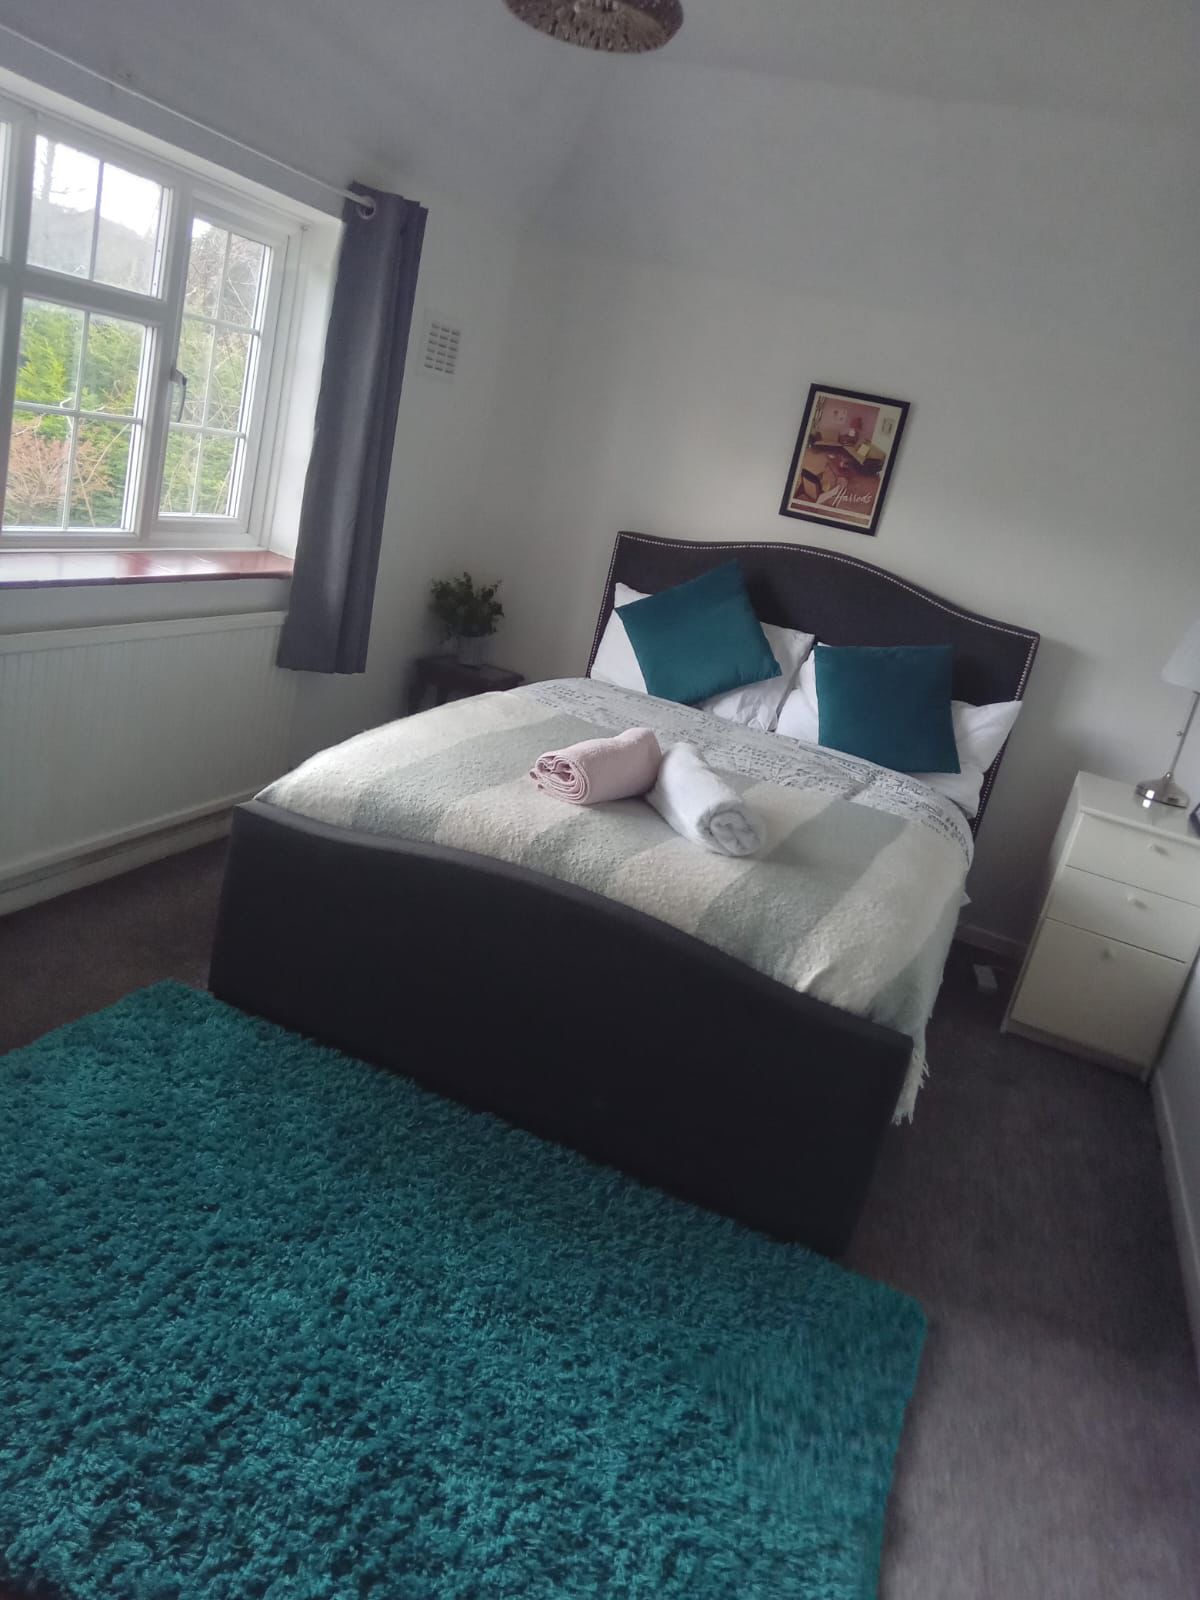 Best Airbnb Cleaning Services in Luton, Milton Keynes & London